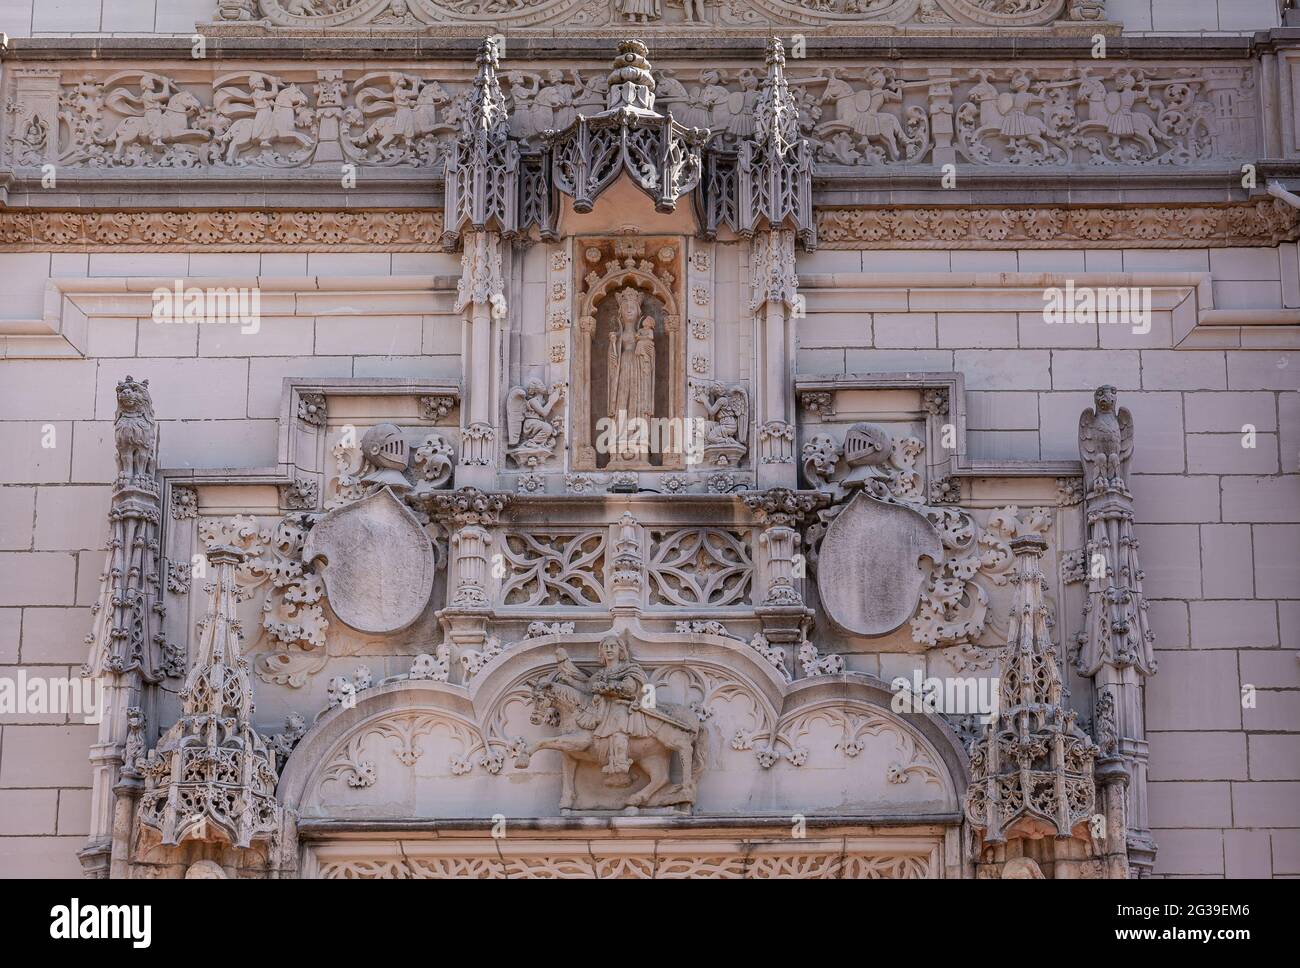 San Simeon, CA, USA - February 12, 2014: Hearst Castle. Closeup of statues and sculptures on mural over main entrance door. Stock Photo